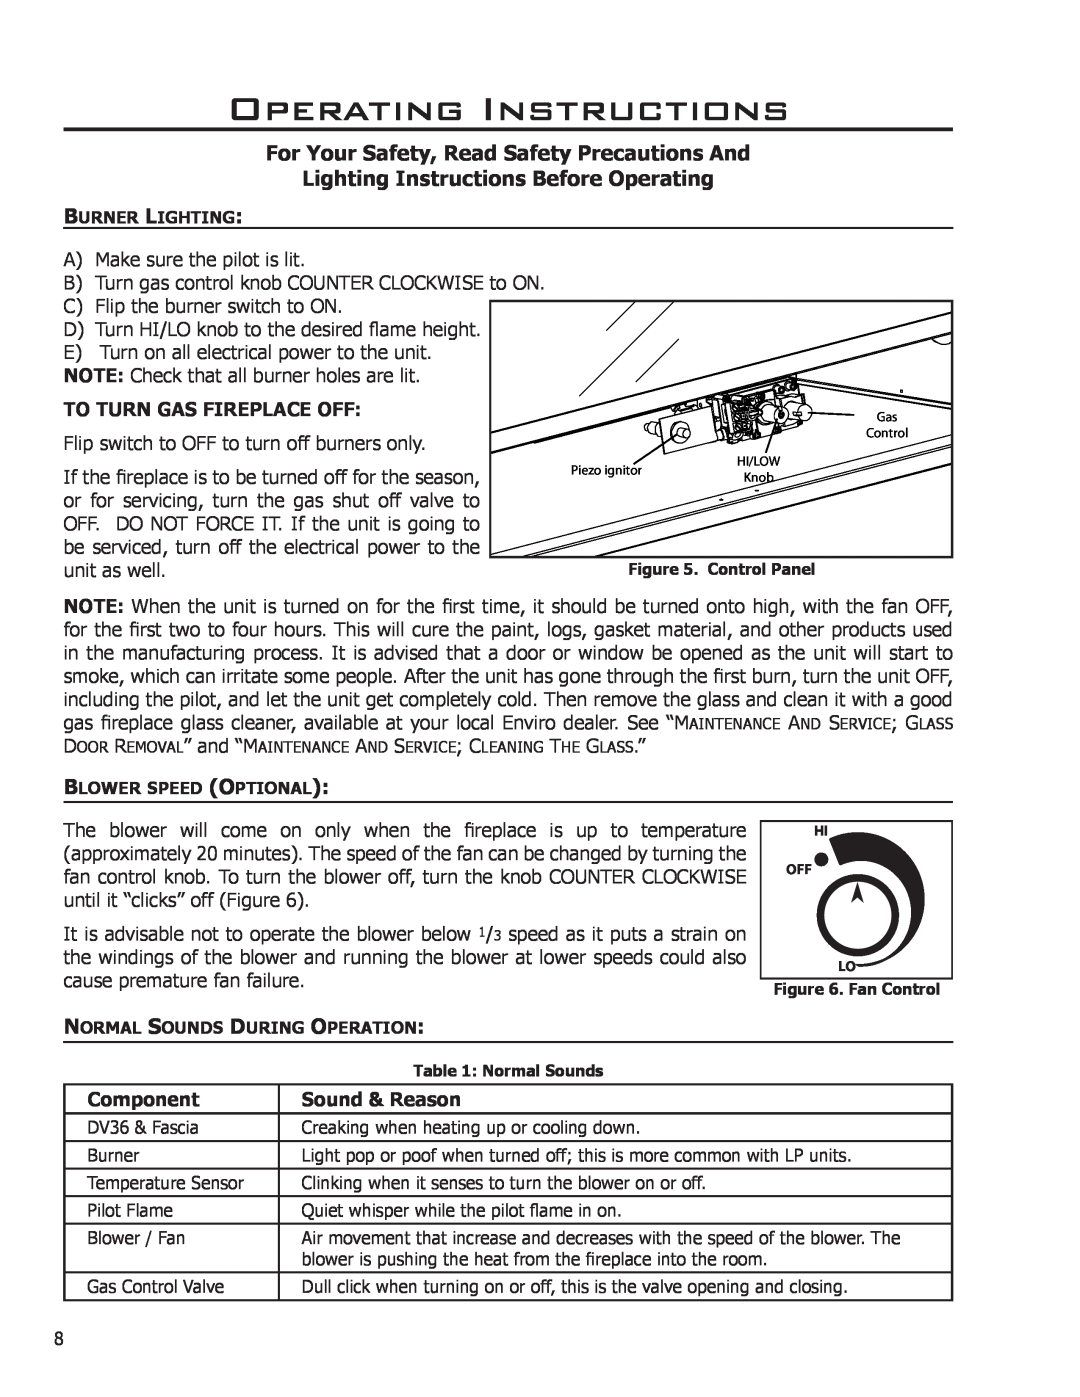 Enviro DV36 owner manual To Turn Gas Fireplace Off, Component, Sound & Reason, Operating Instructions 